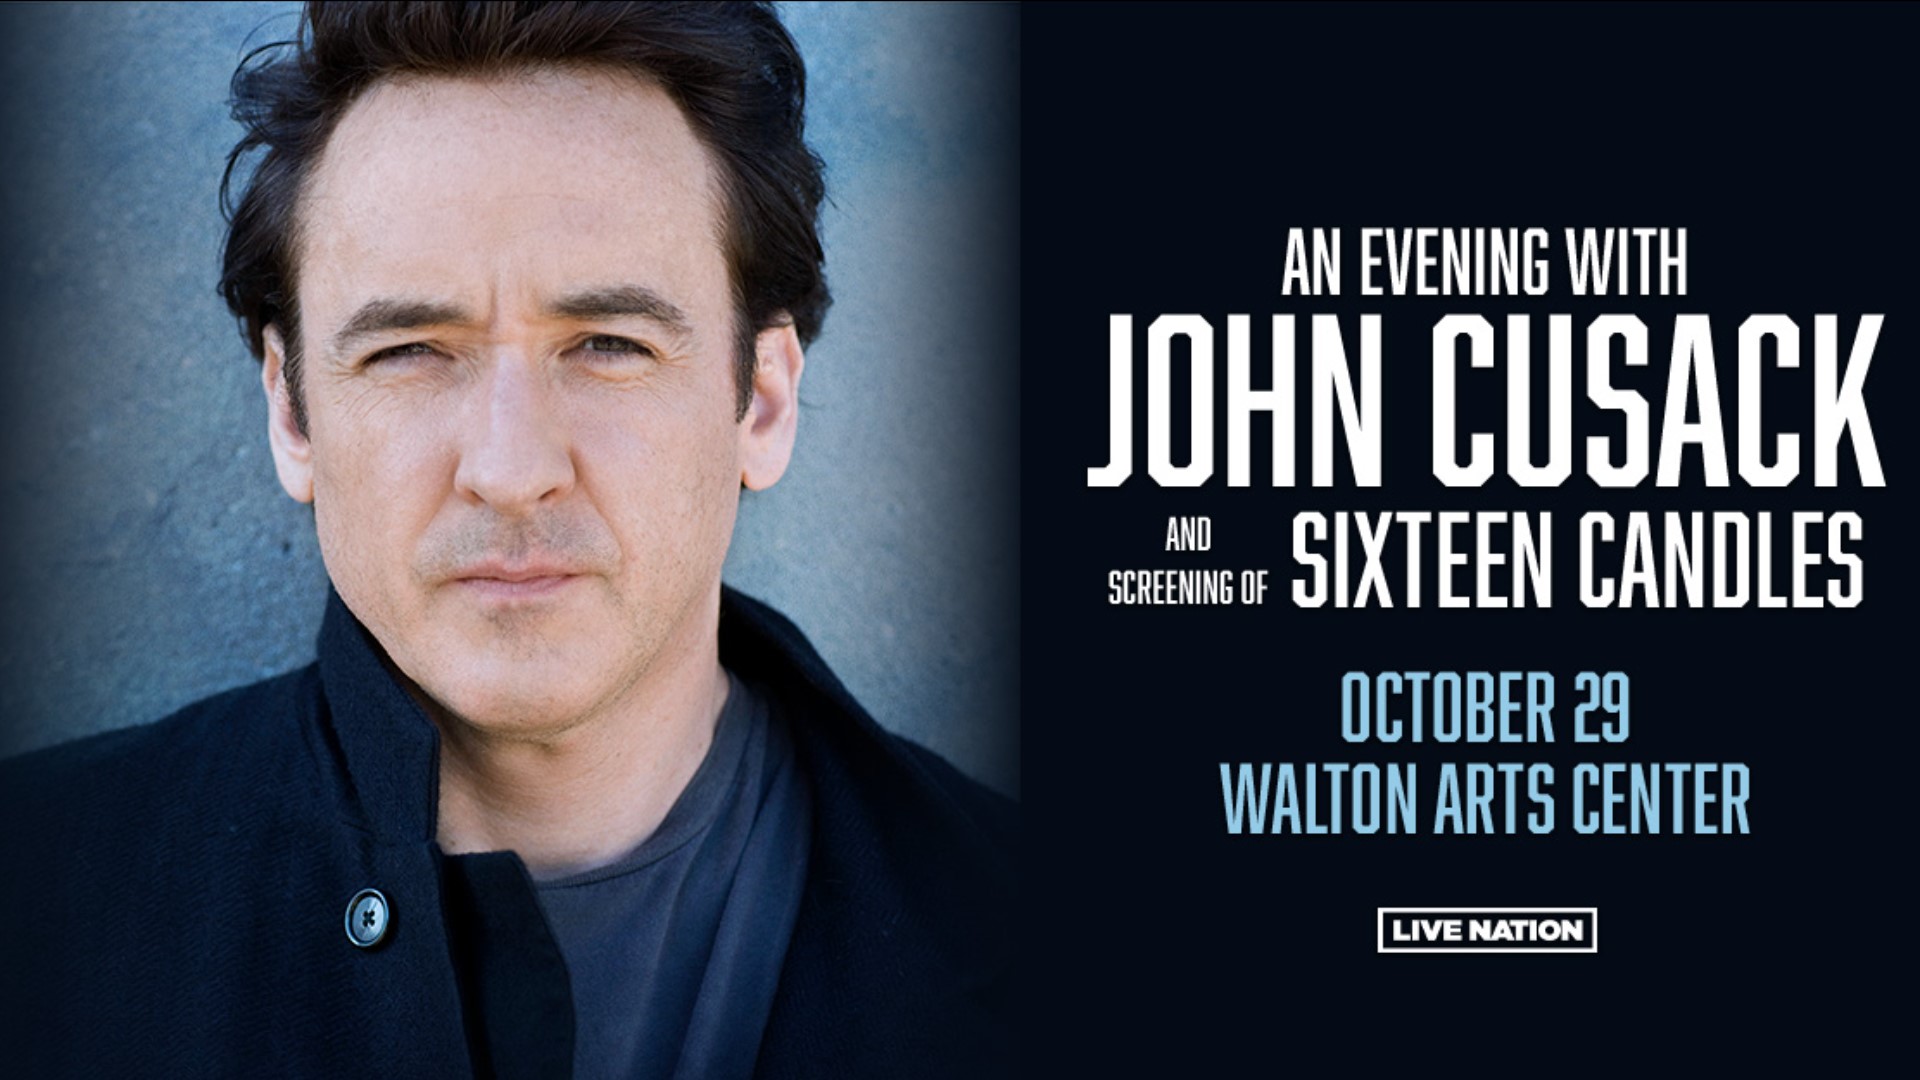 Actor John Cusack will hold a screening of the 80s classic, 16 Candles, followed by a conversation about the film and his career.